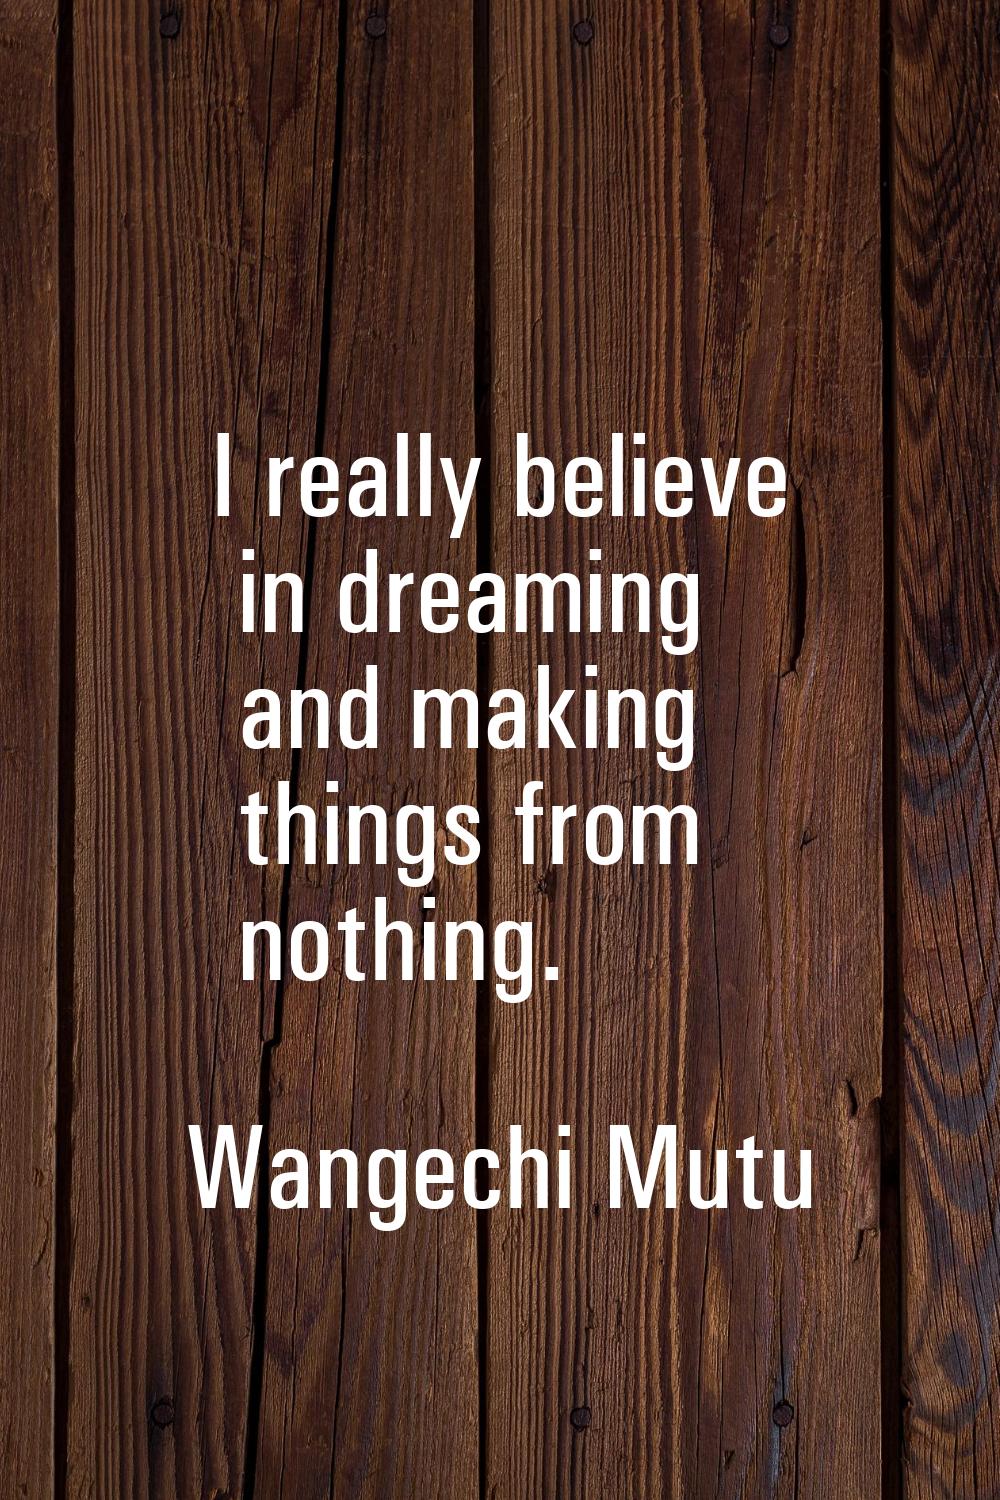 I really believe in dreaming and making things from nothing.